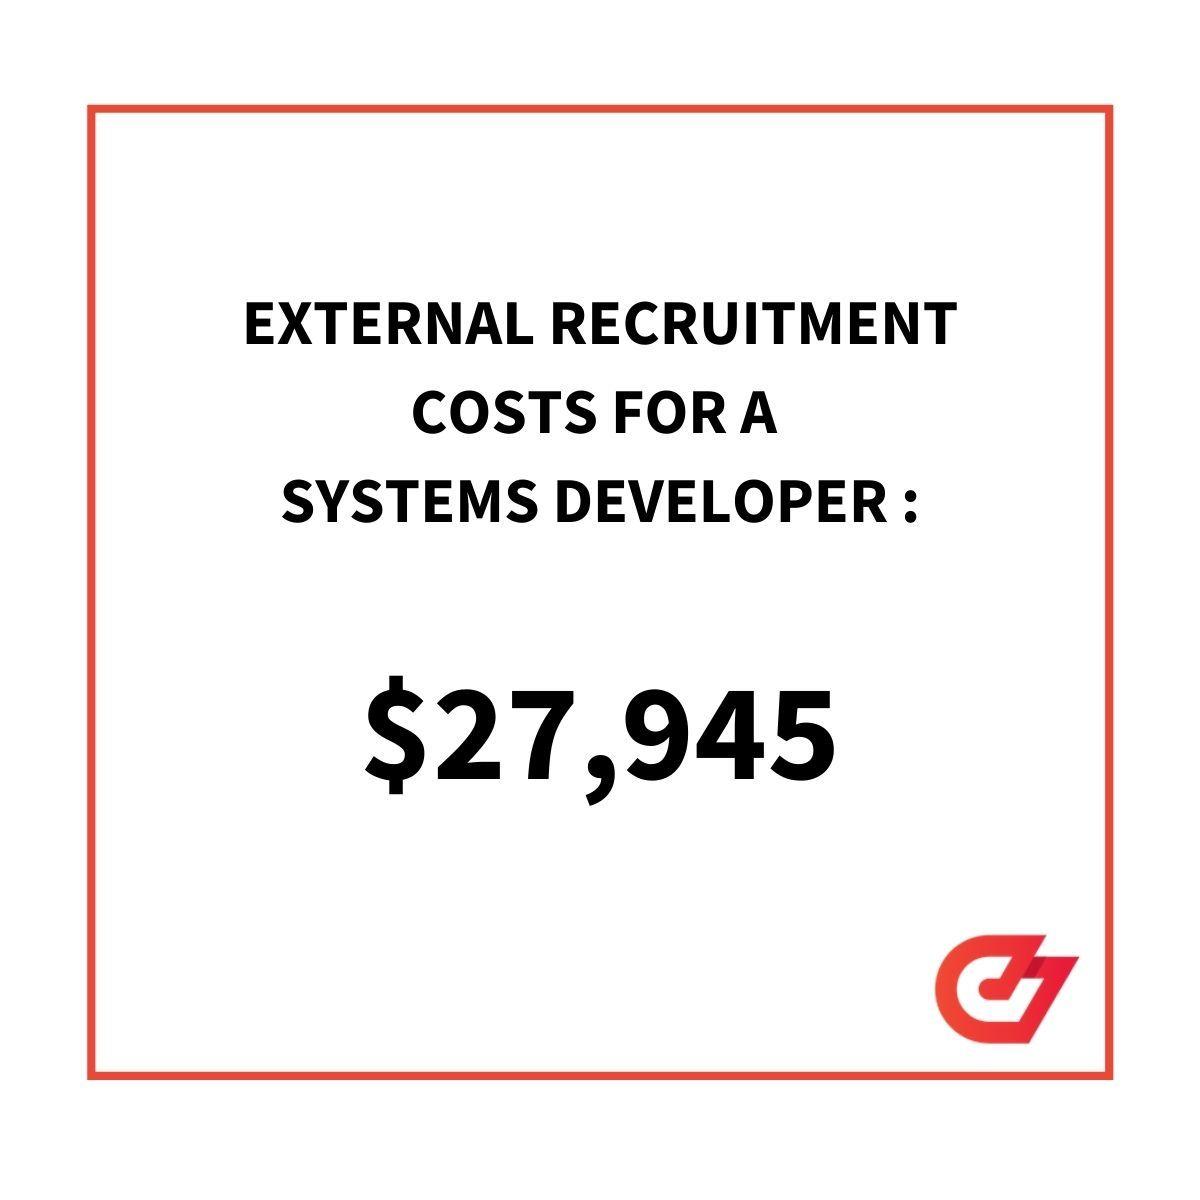 external recruitment costs for a systems developer equals $27,945